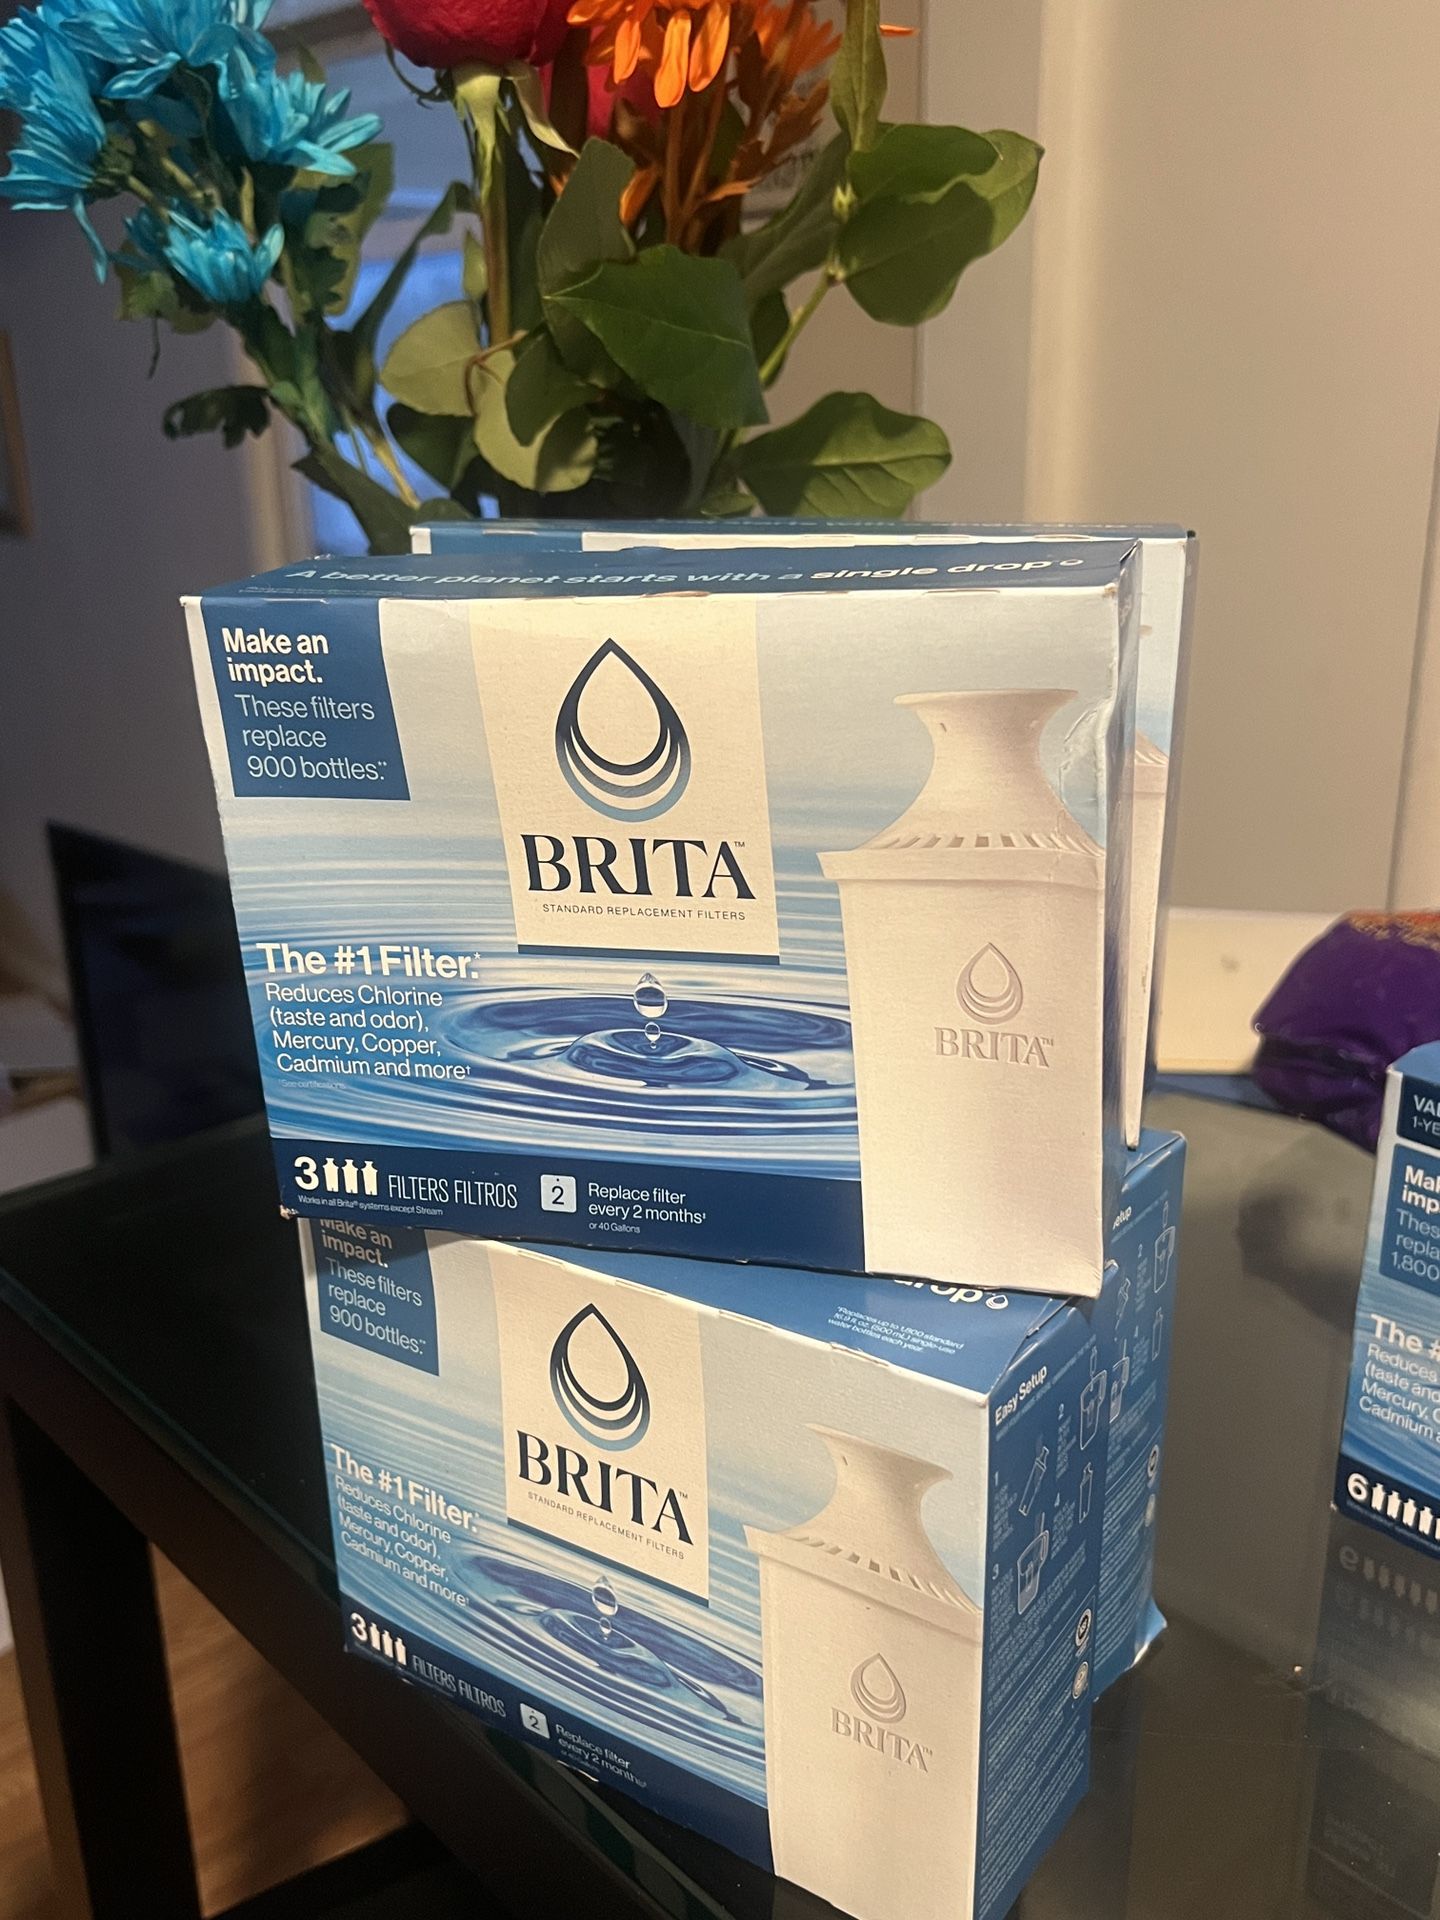 2 Boxes of Brita Standard Water Filters - Year Supply